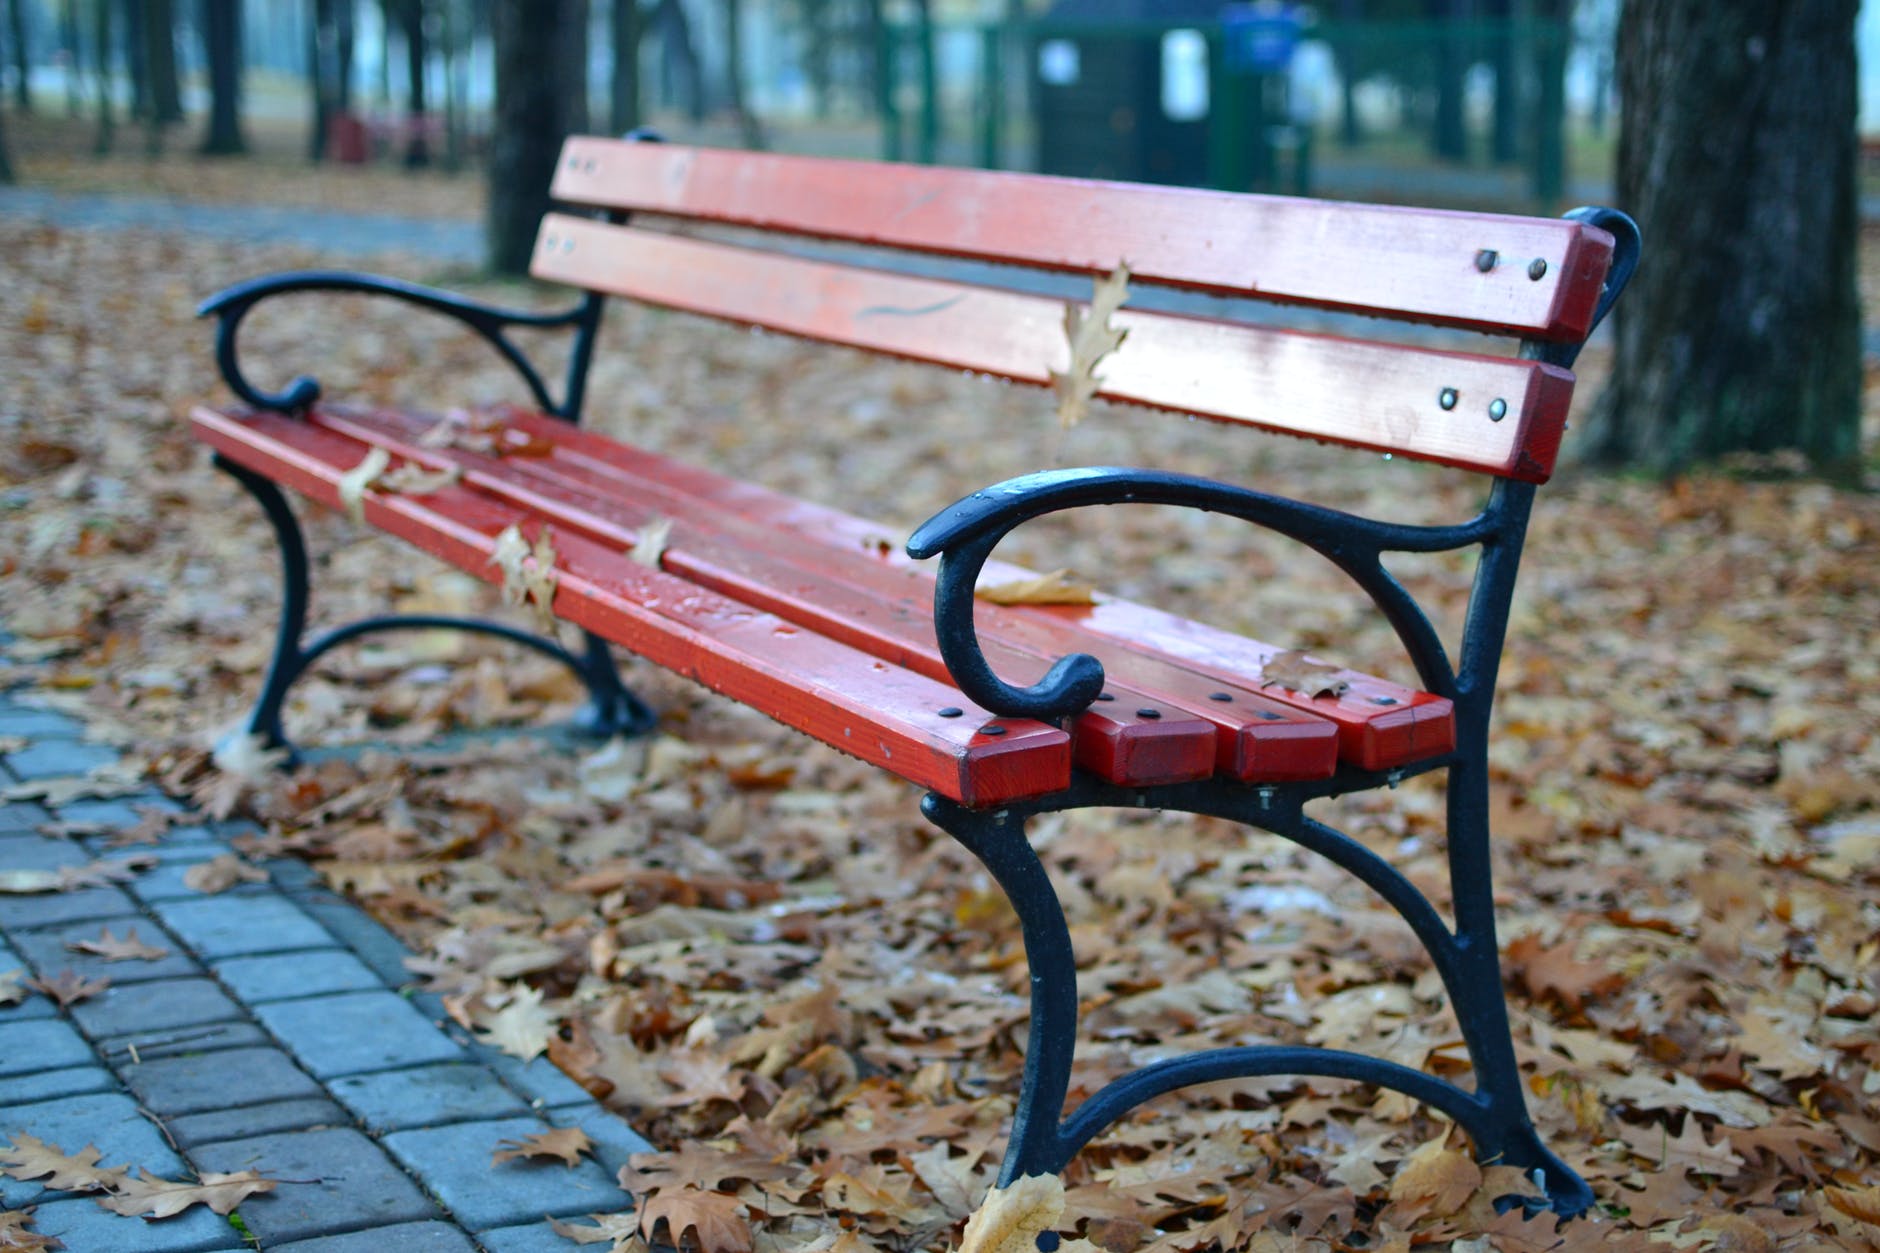 She sat down on a park bench and fell asleep. | Source: Pexels